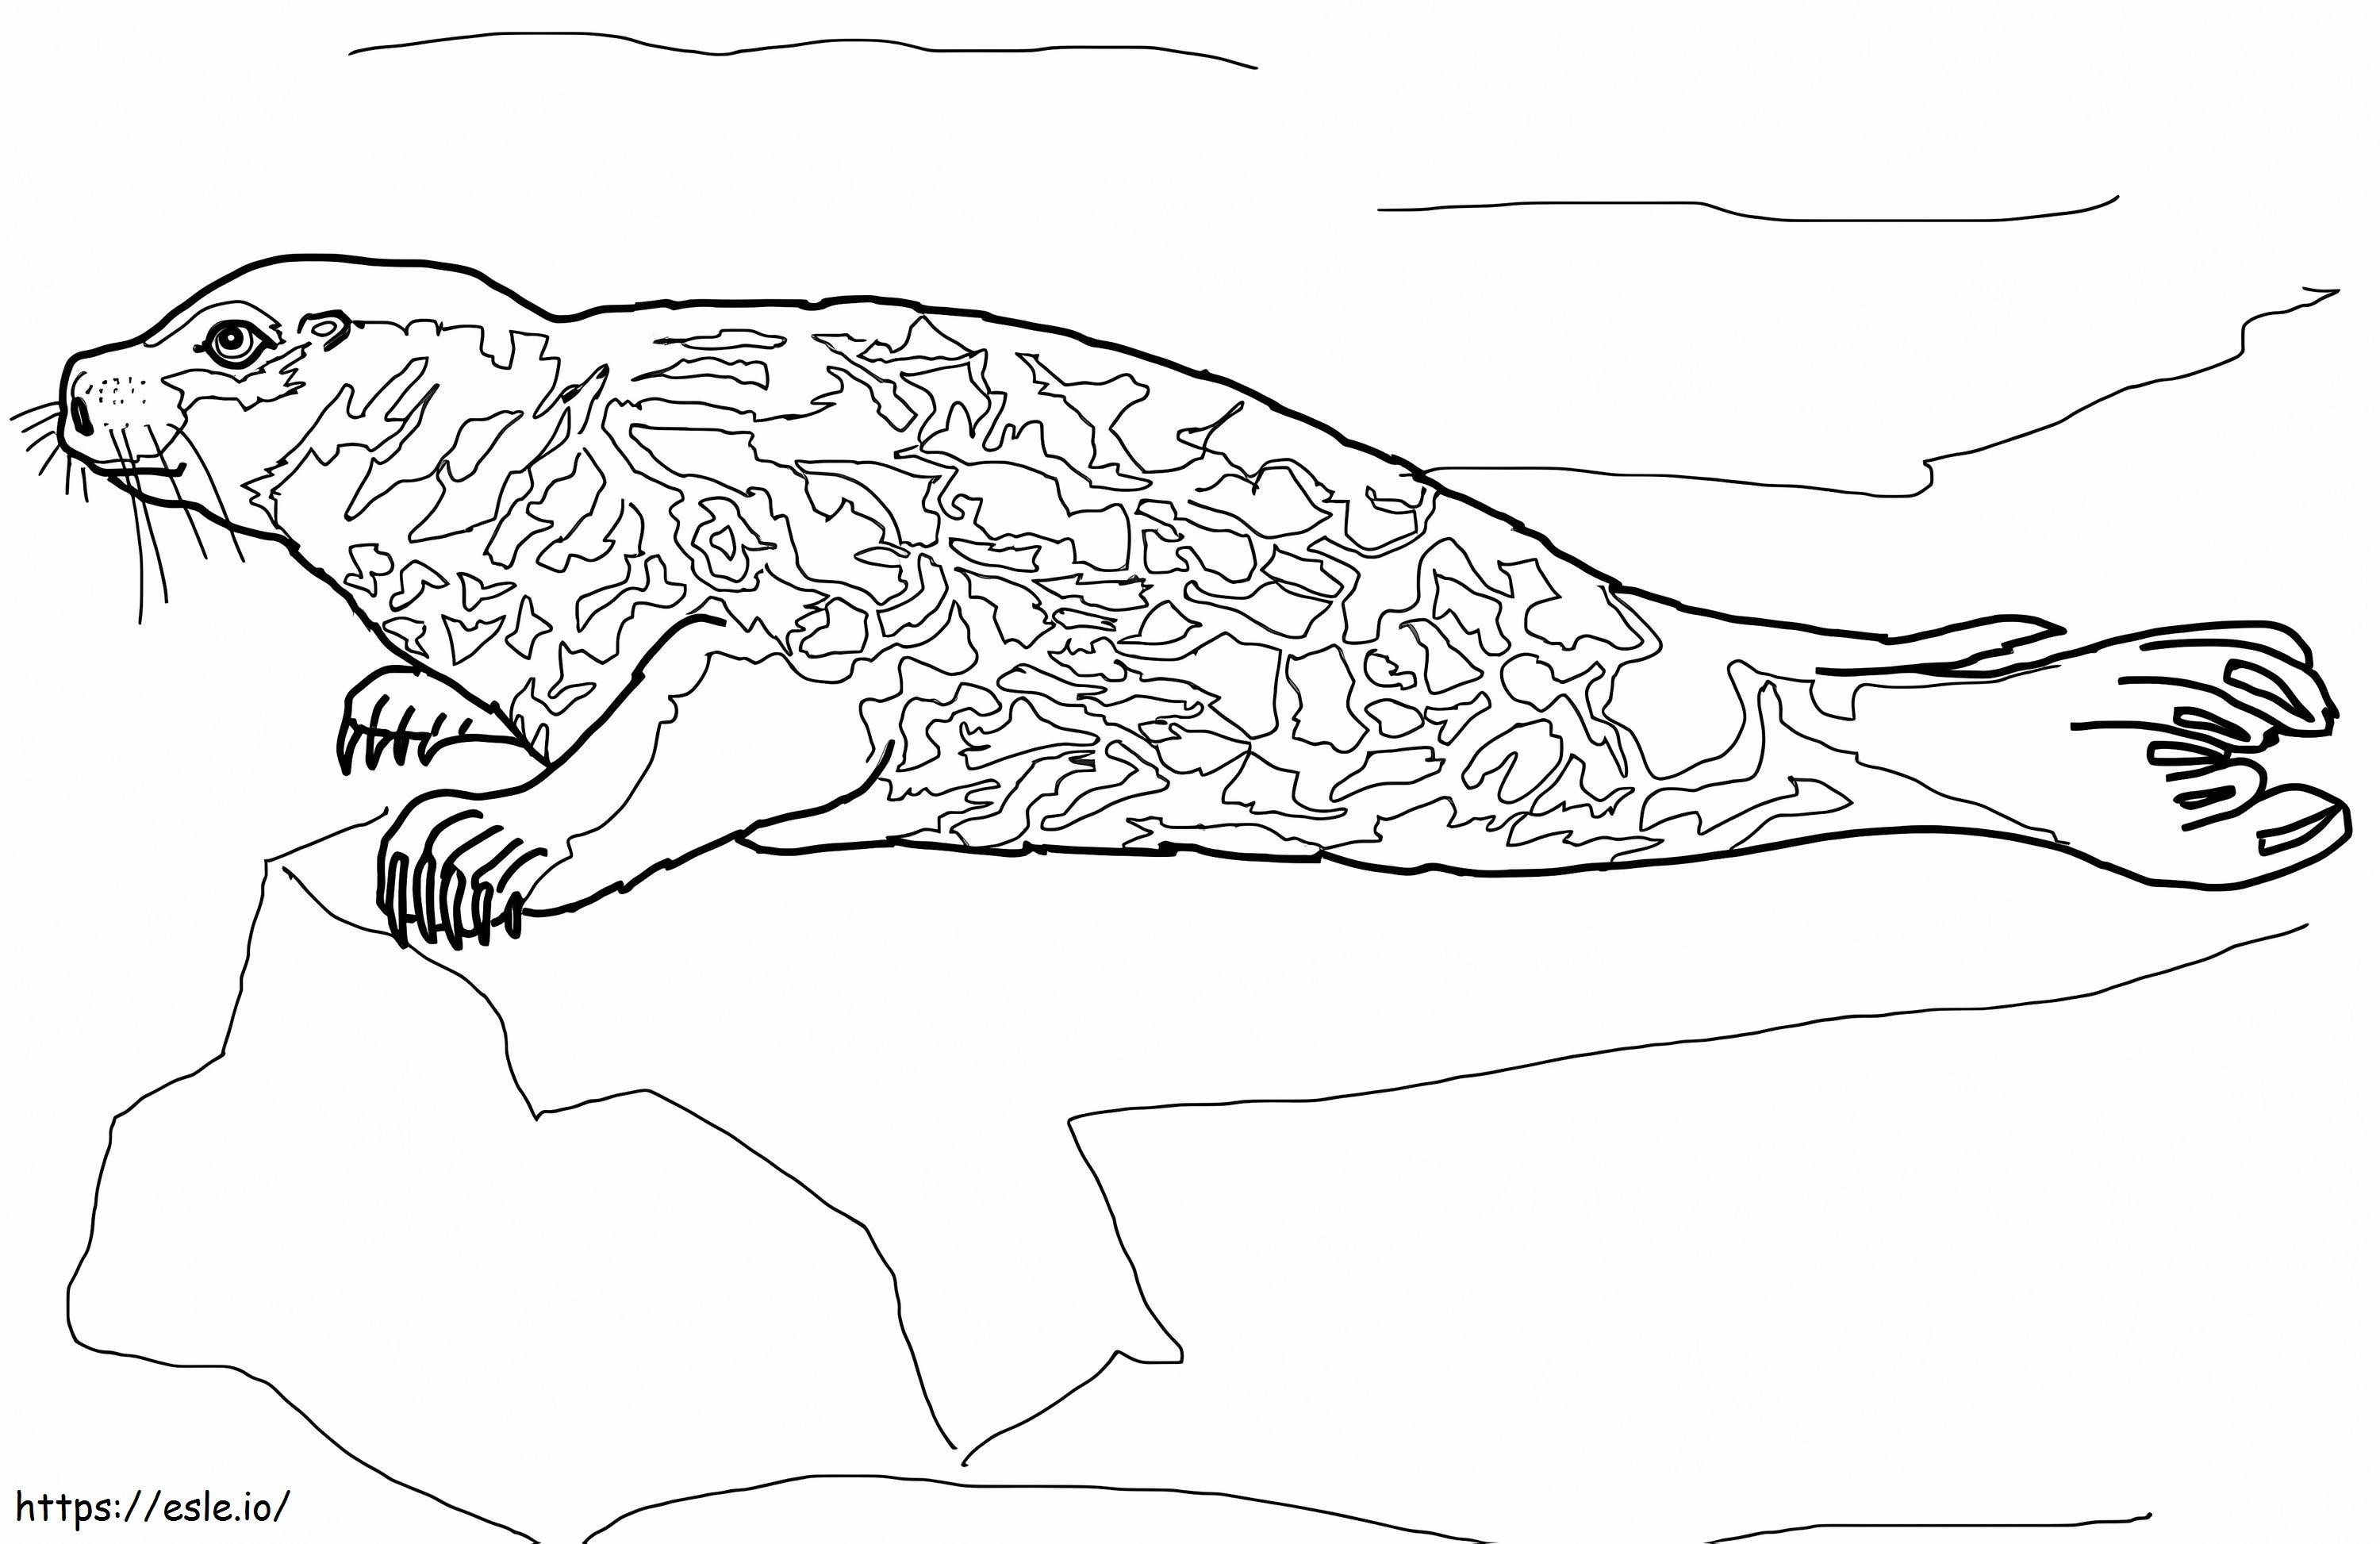 A Harbor Seal coloring page